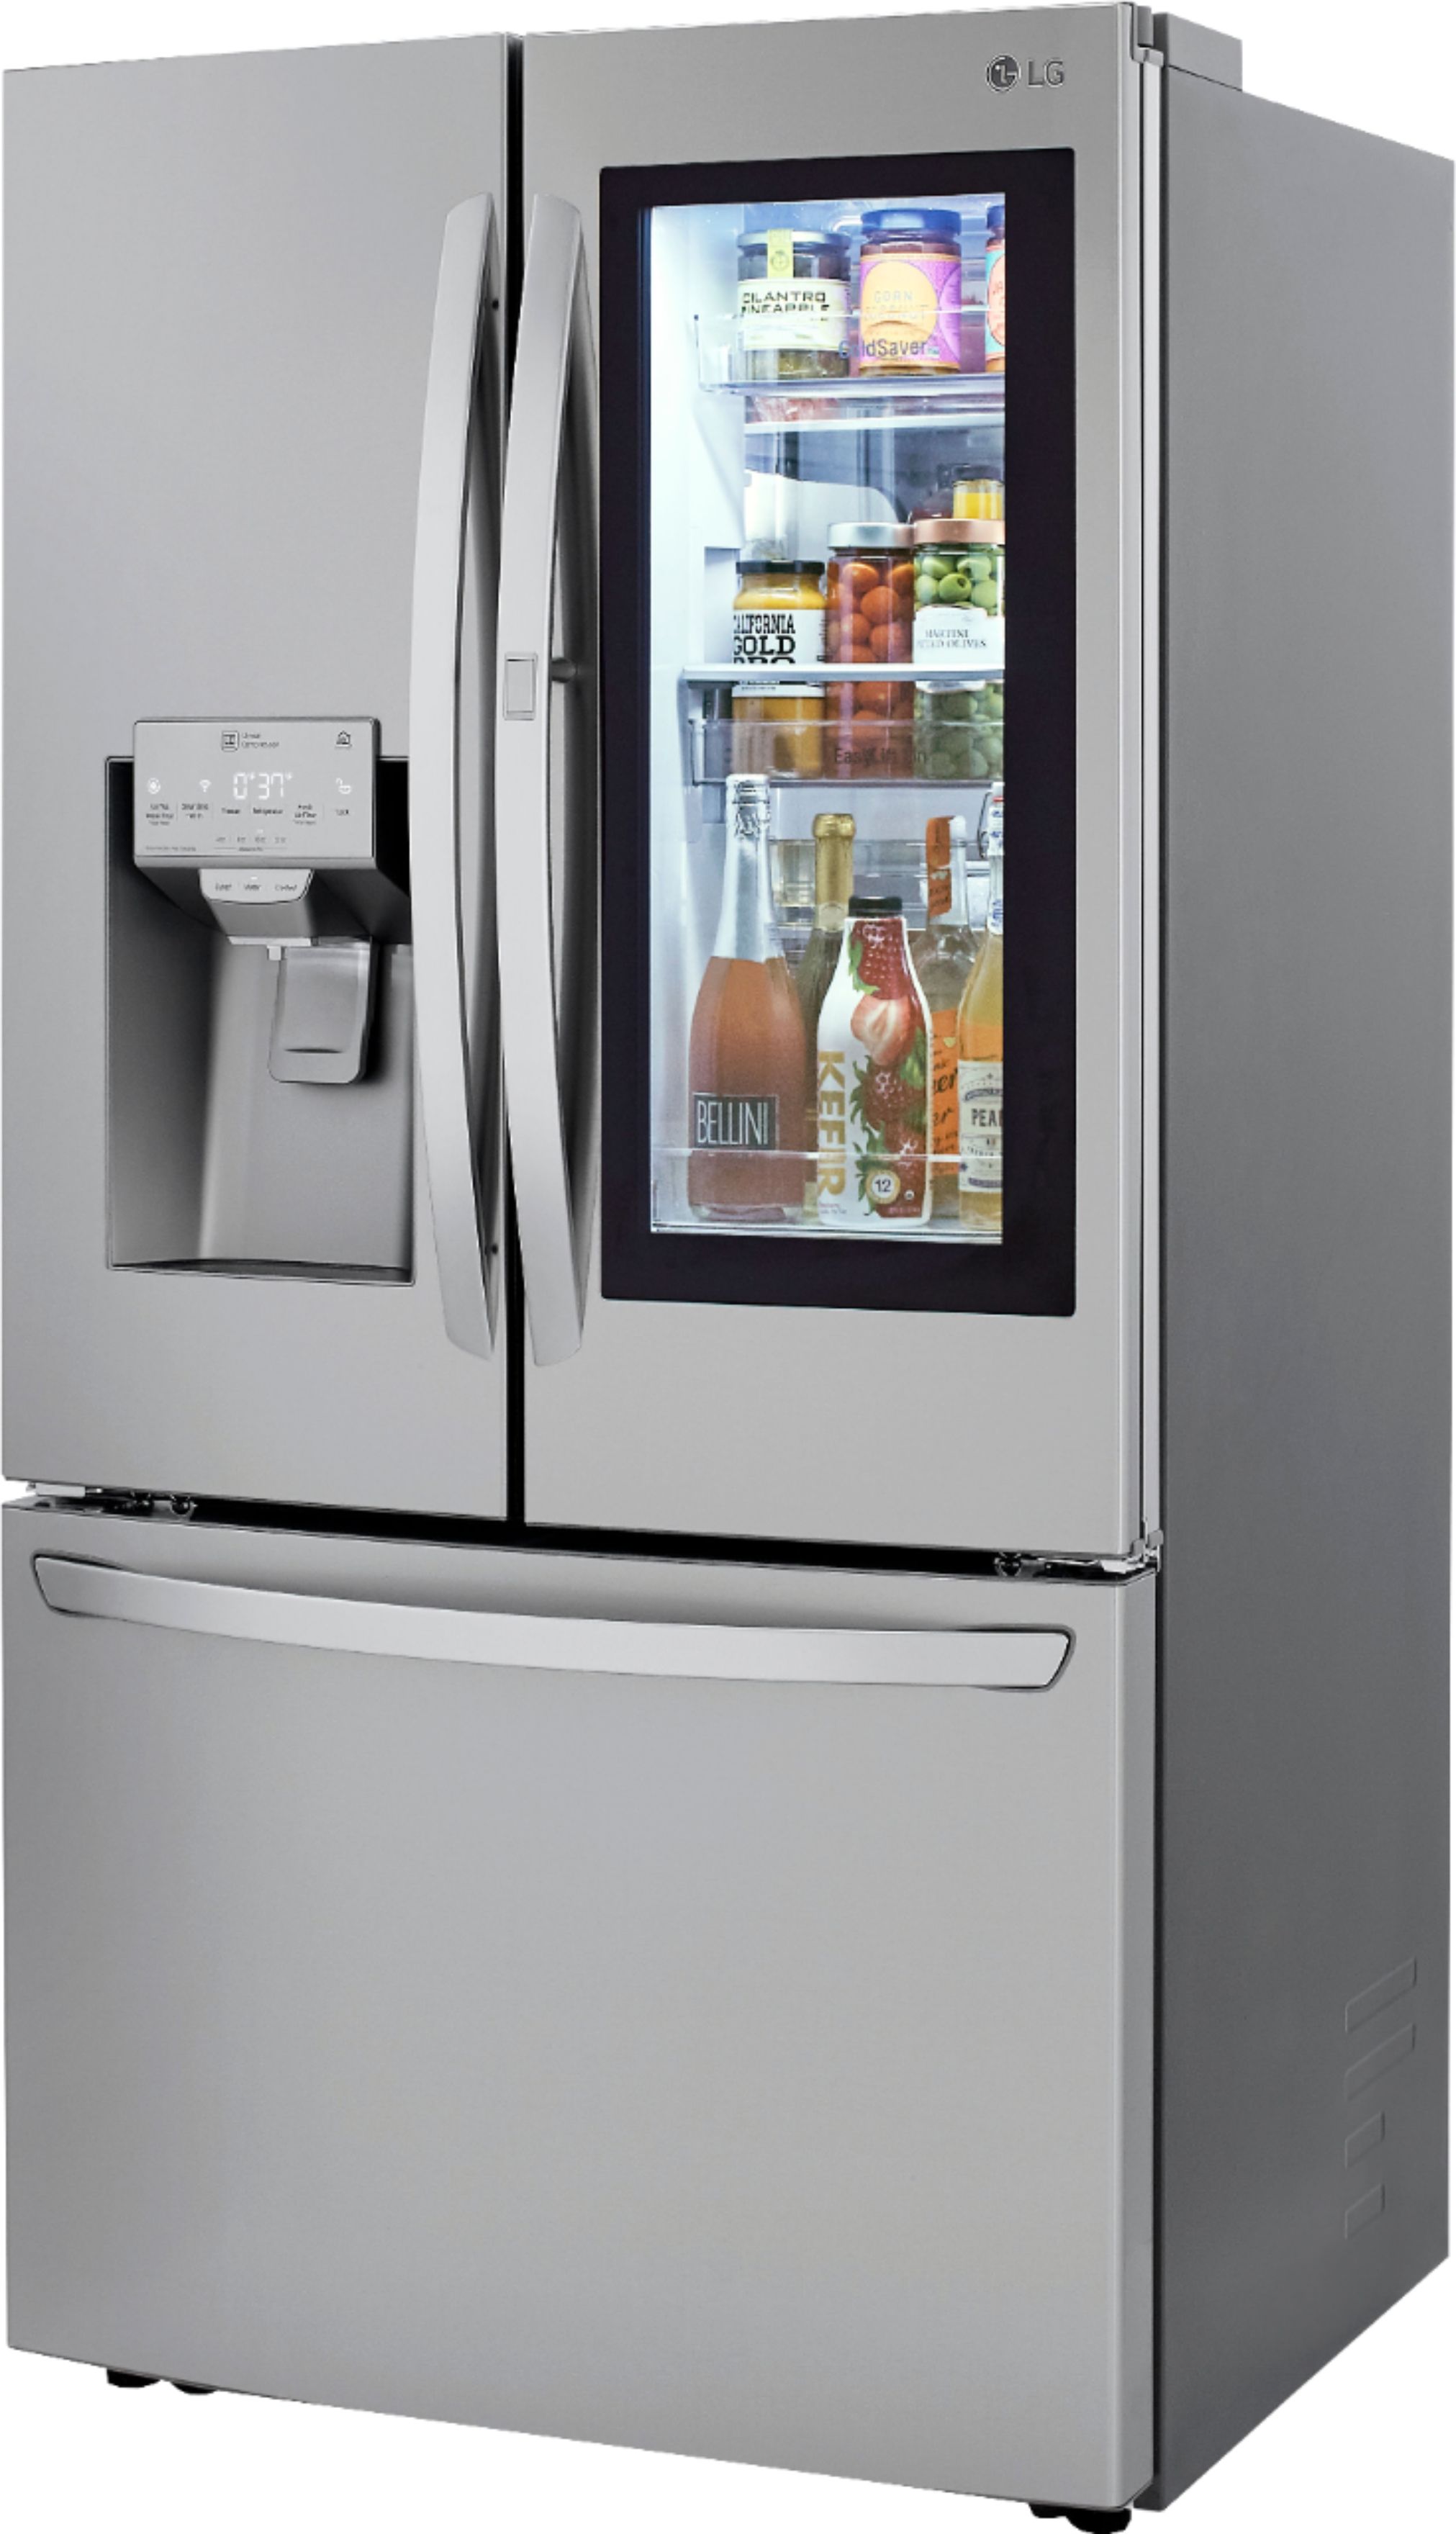 LG's $4,399.99 fridge makes 'craft ice' for cocktail lovers - The Verge